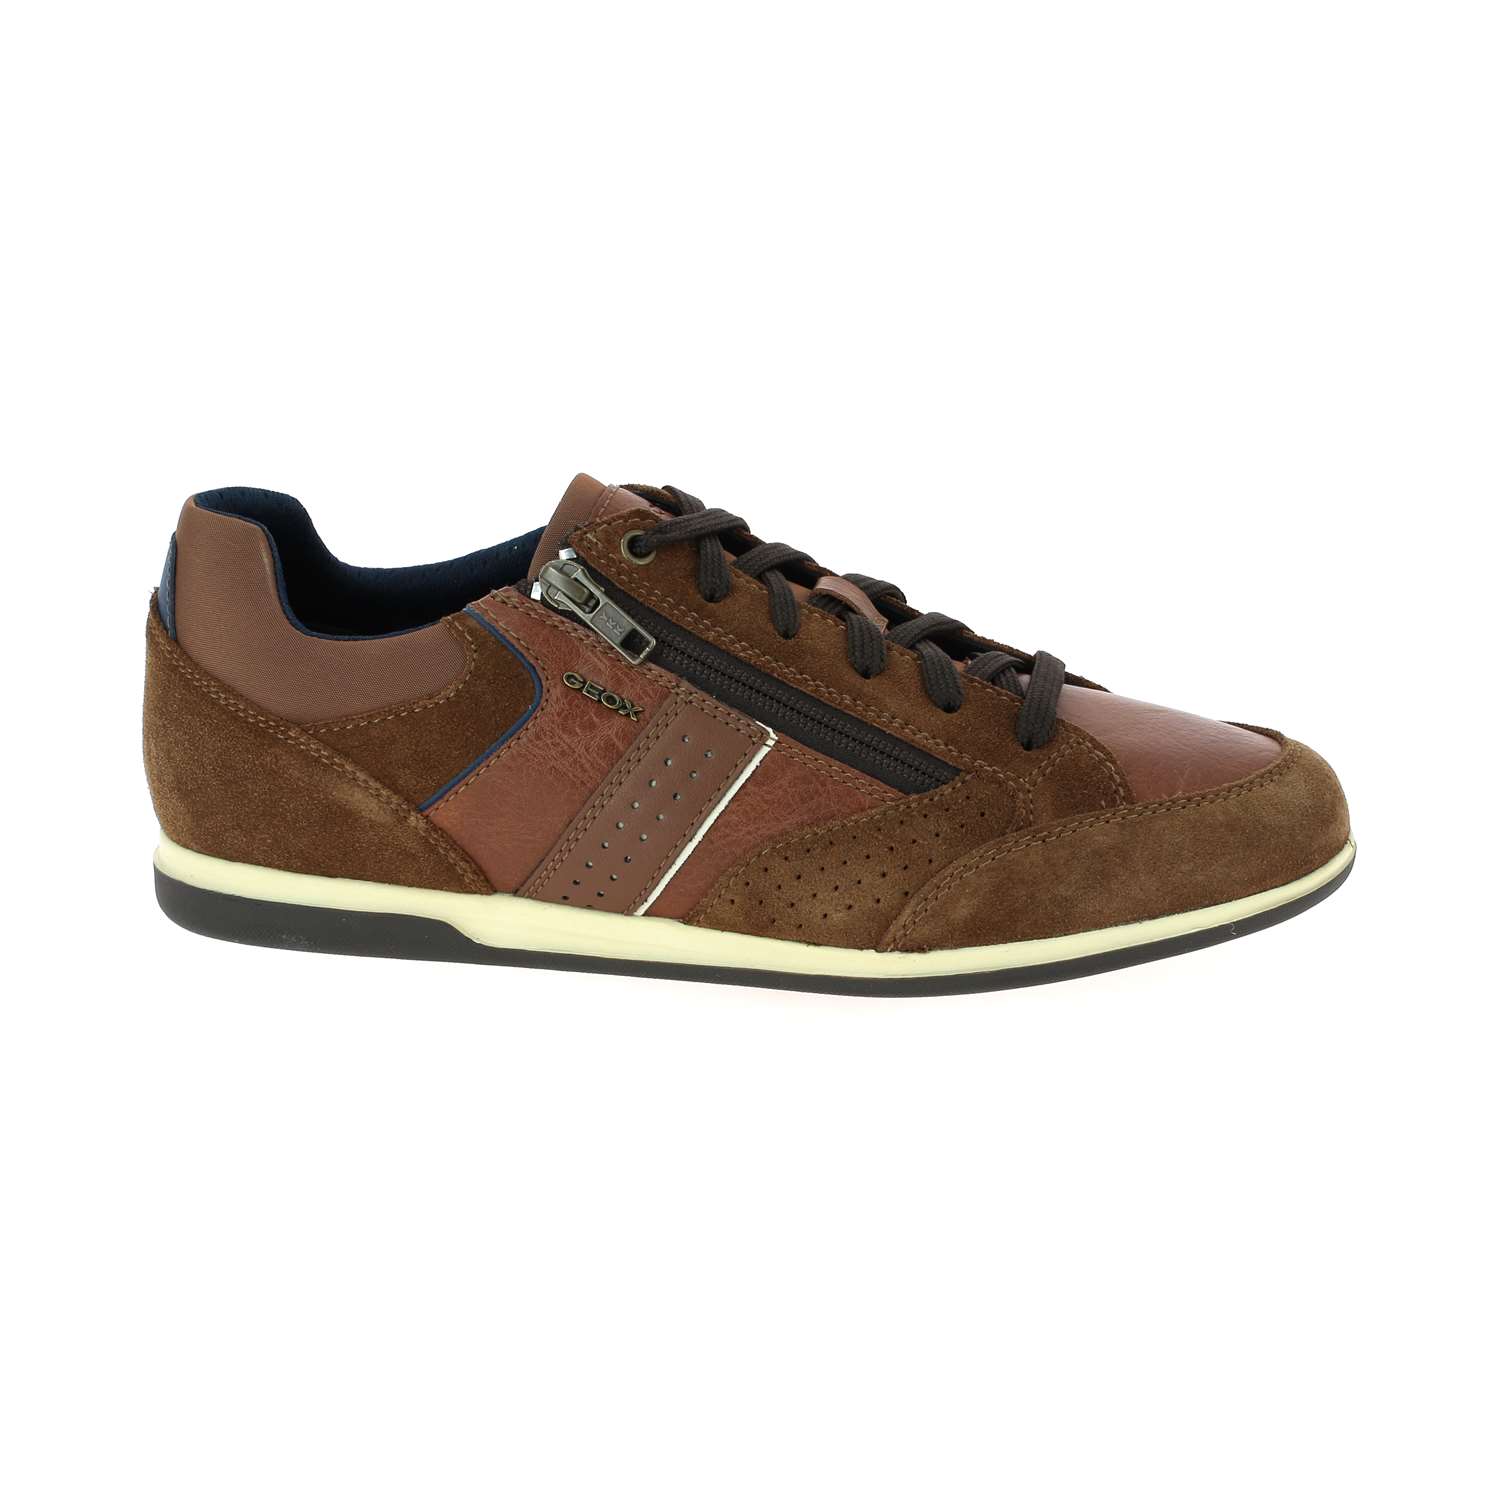 02 - RENAN - GEOX - Chaussures à lacets - 